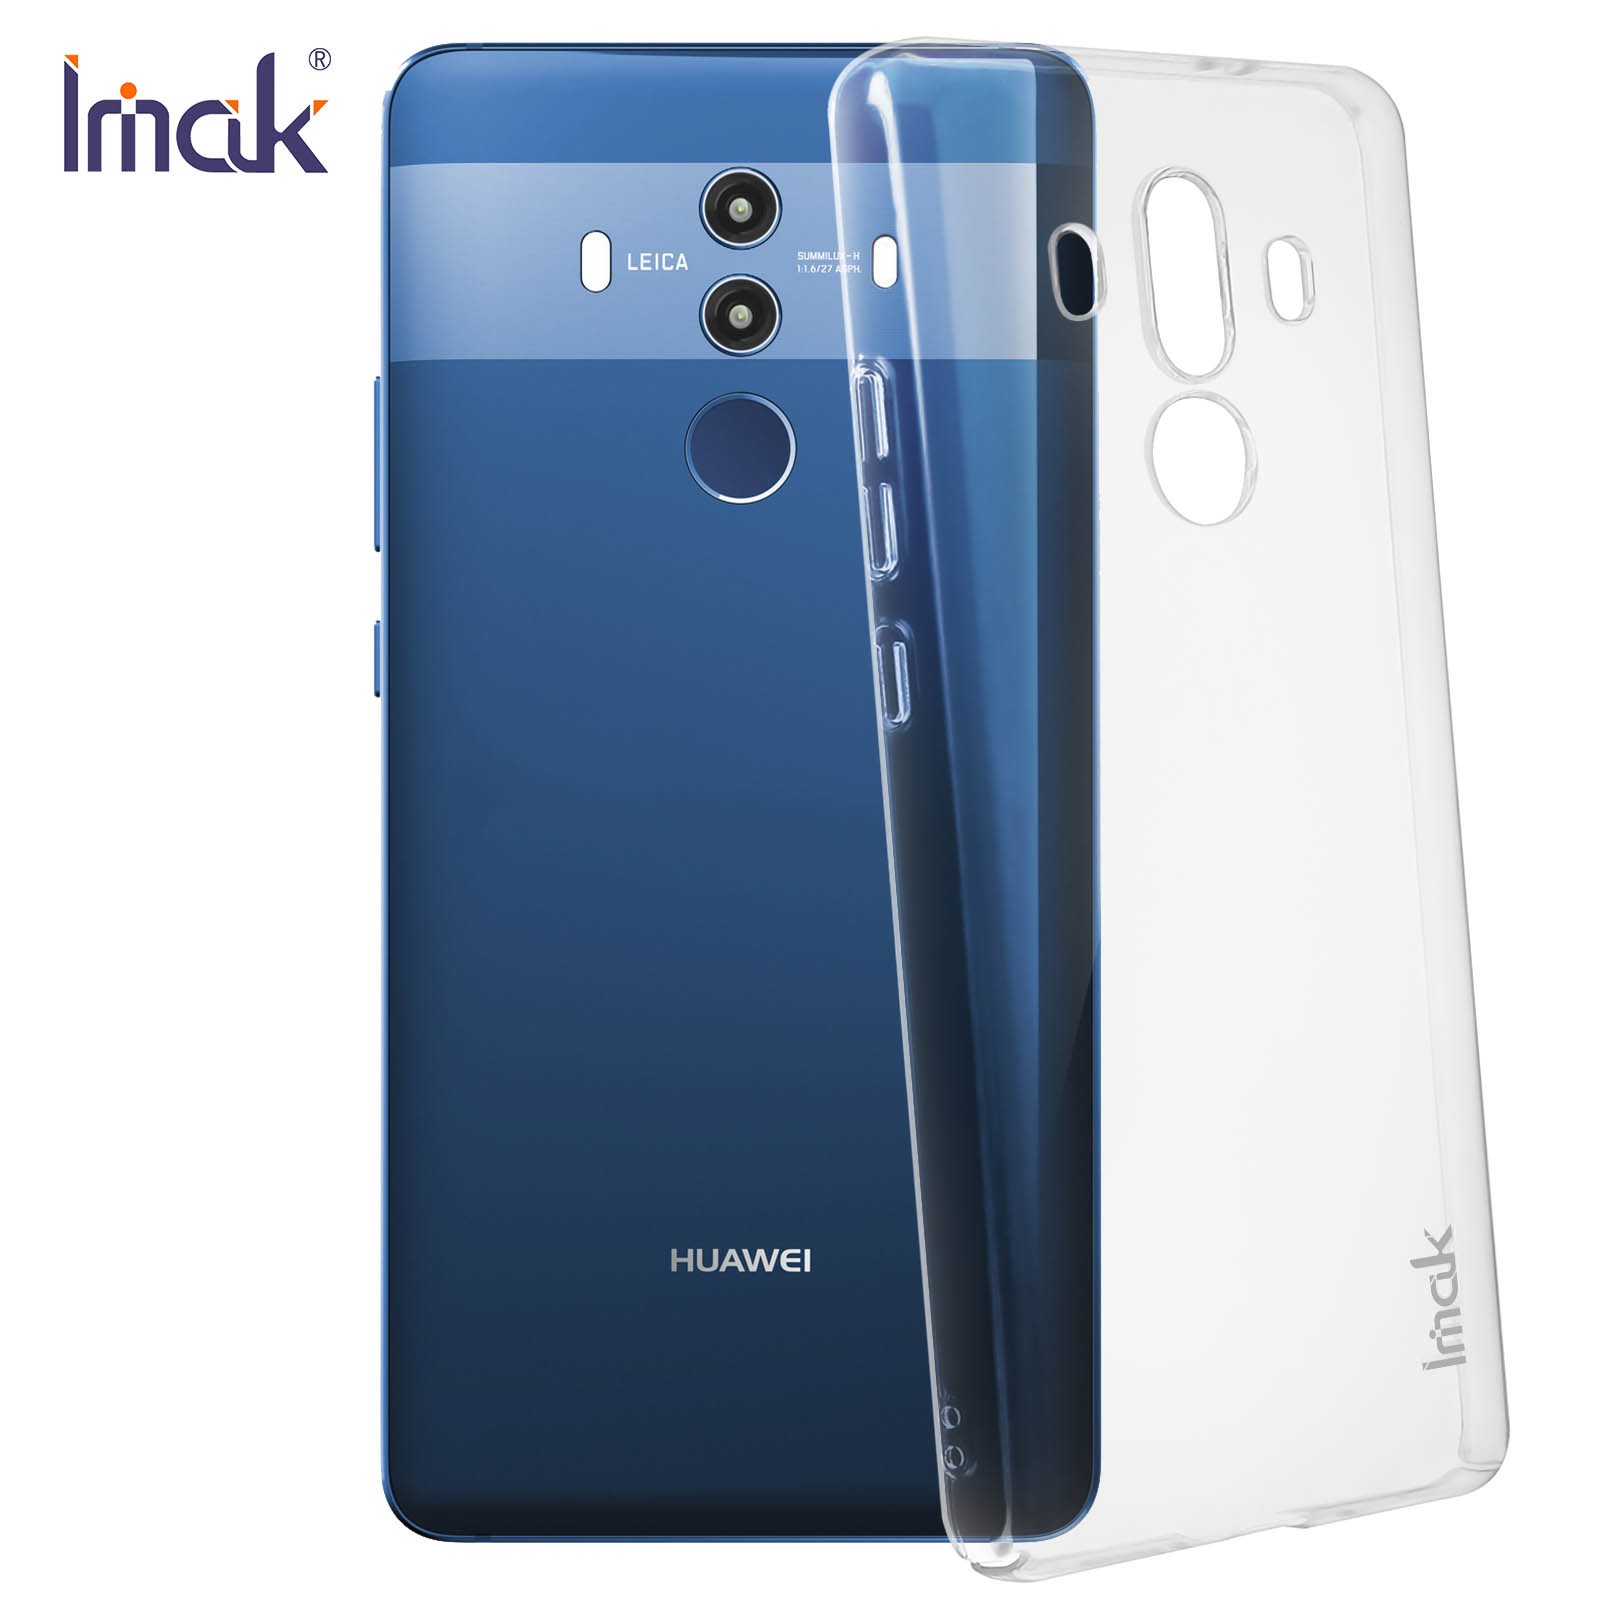 Case Huawei Mate 10 Pro with pictures